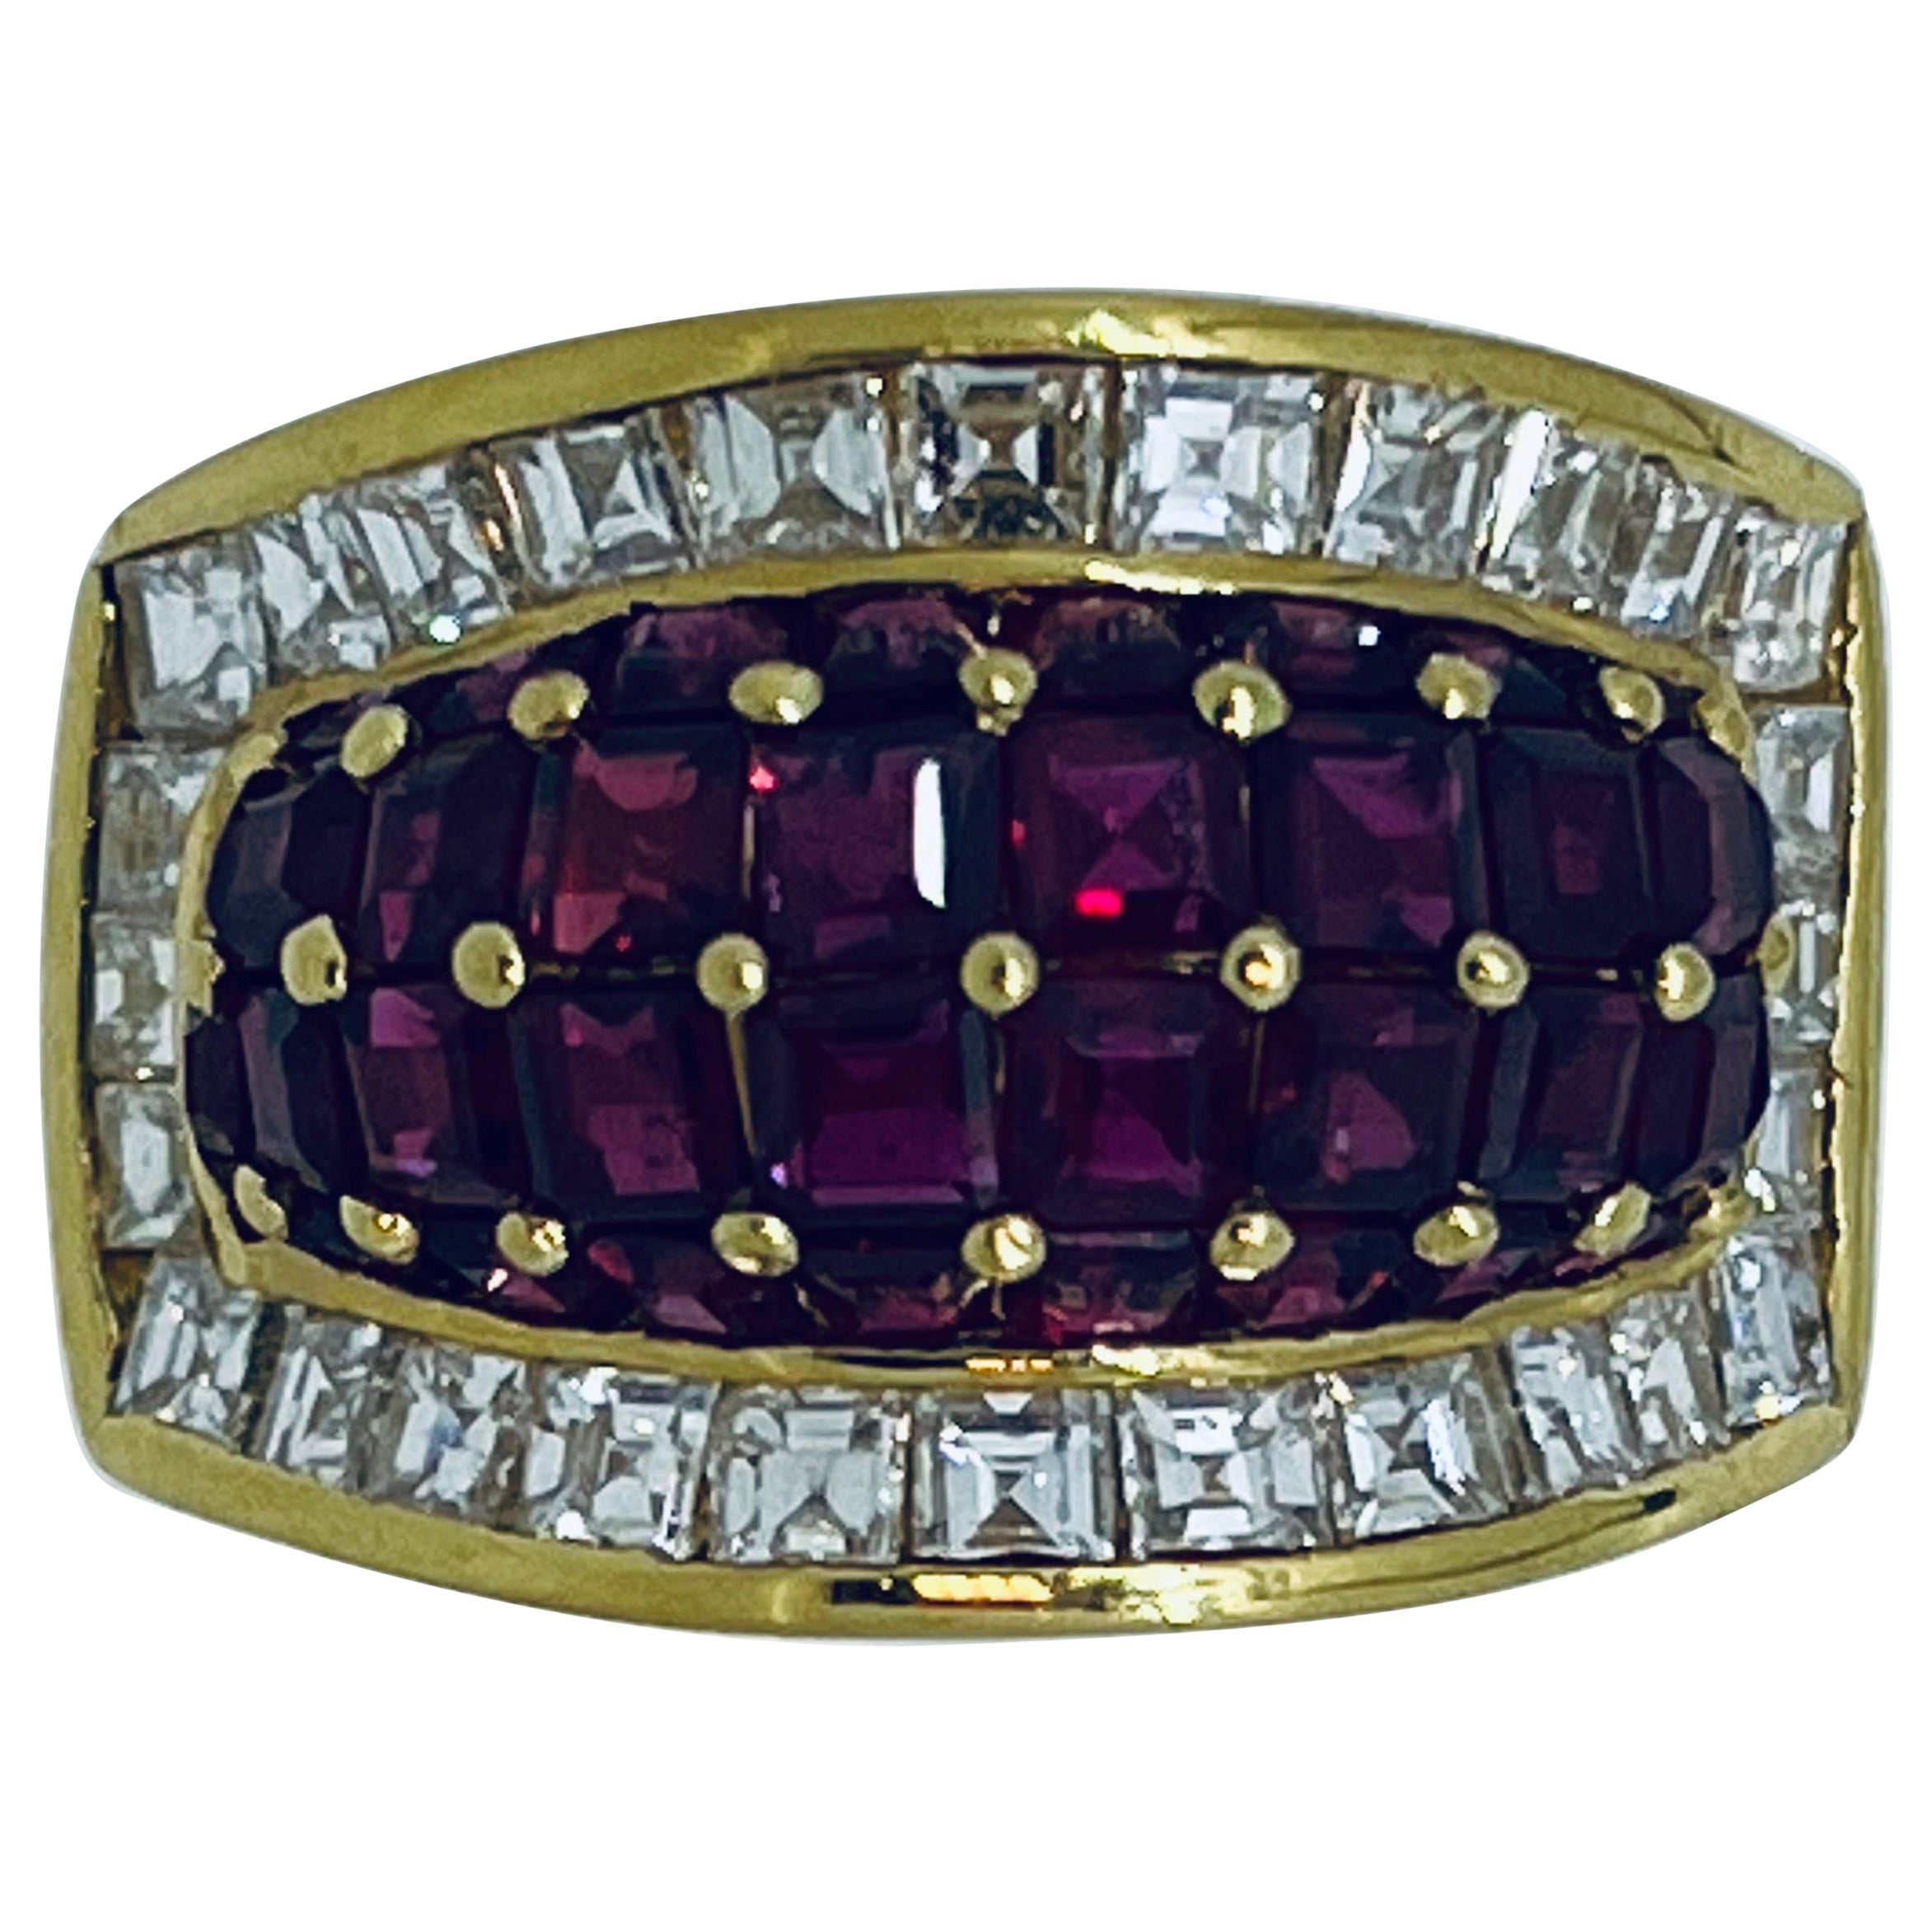 Stamped 18ct Gold, 1.40ct Diamonds and 5ct Ruby Italian Vintage Ring